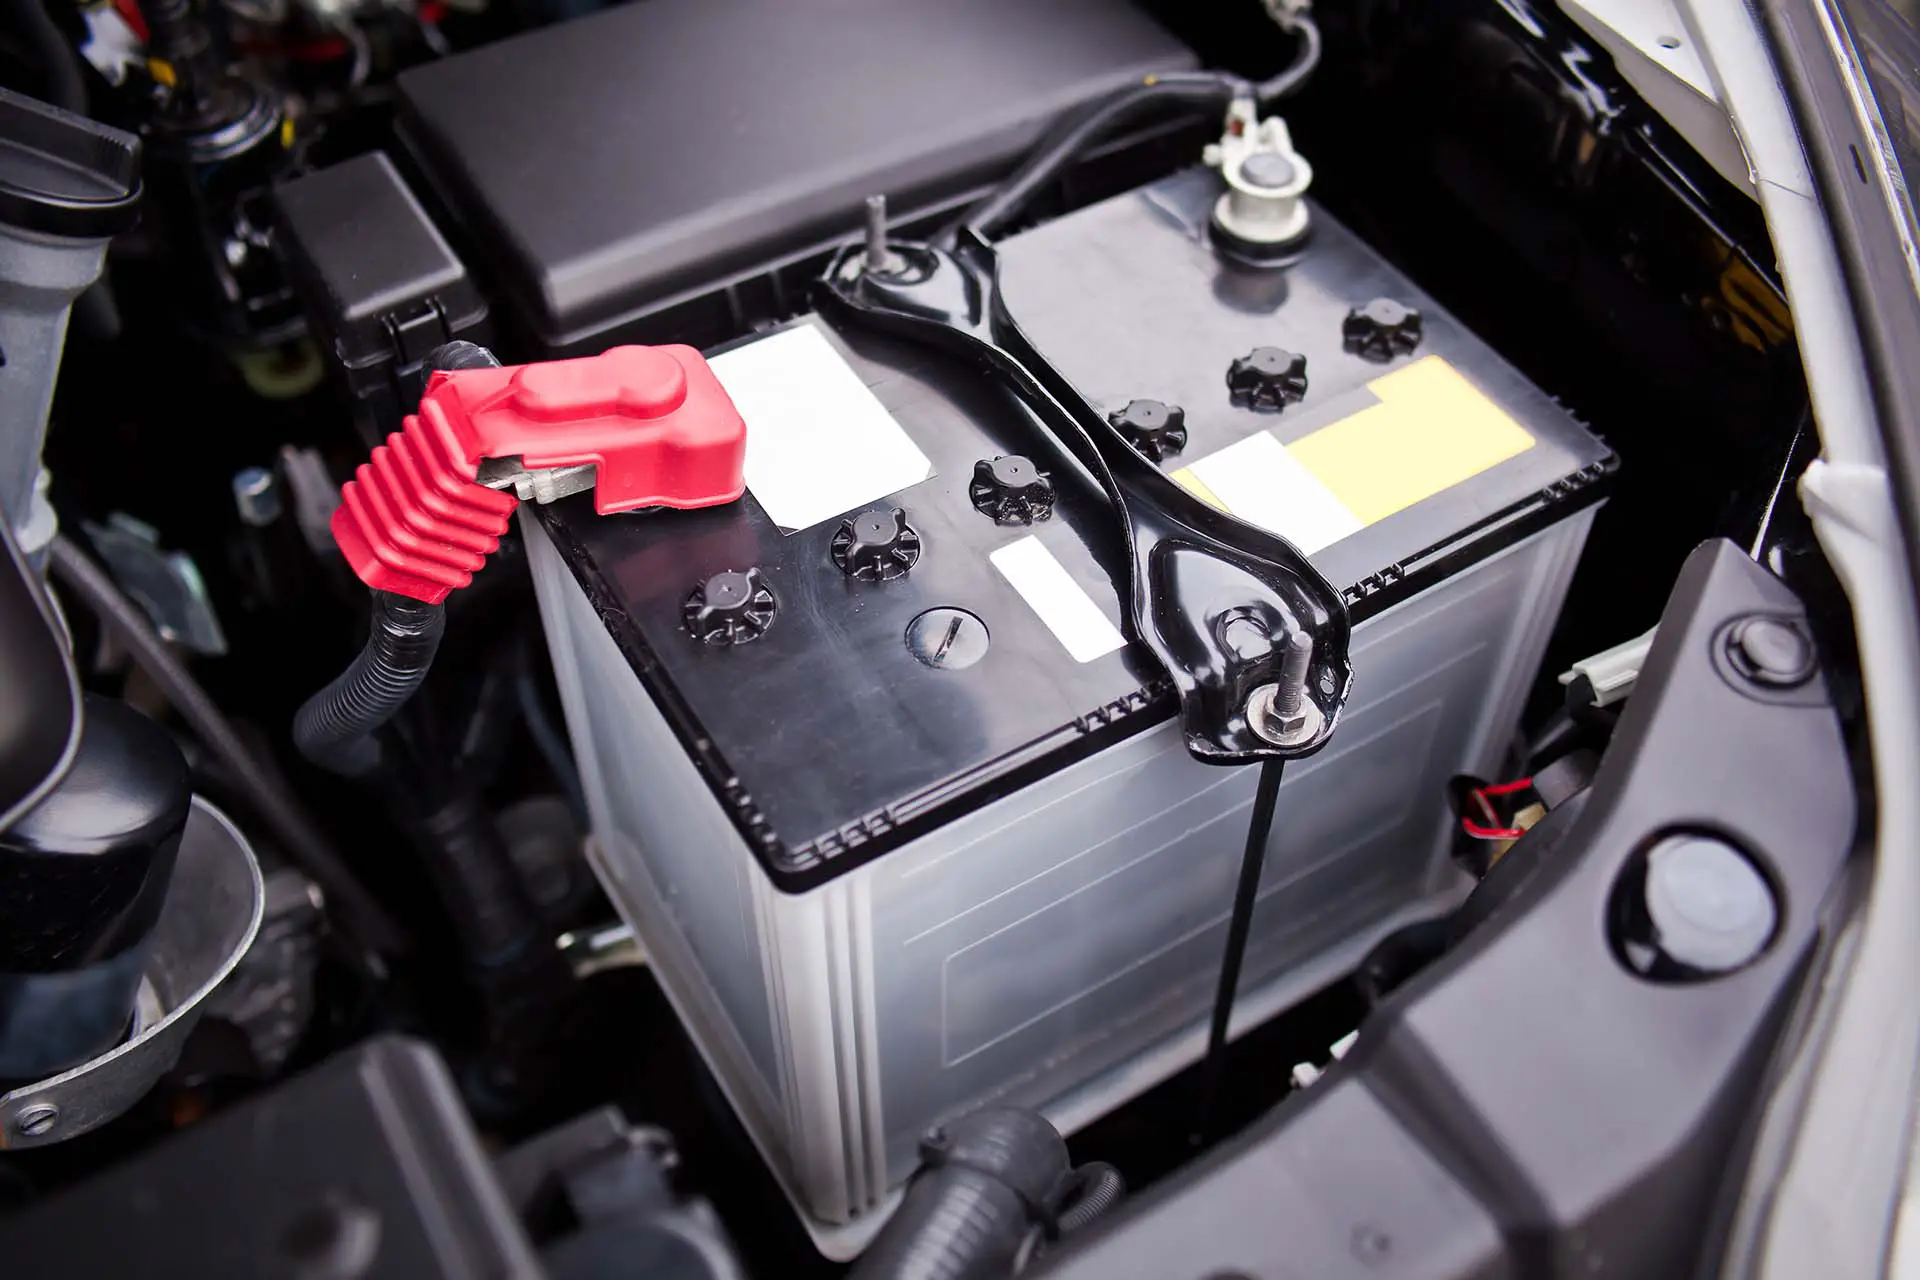 Battery installed near the М8 motor in SUV.